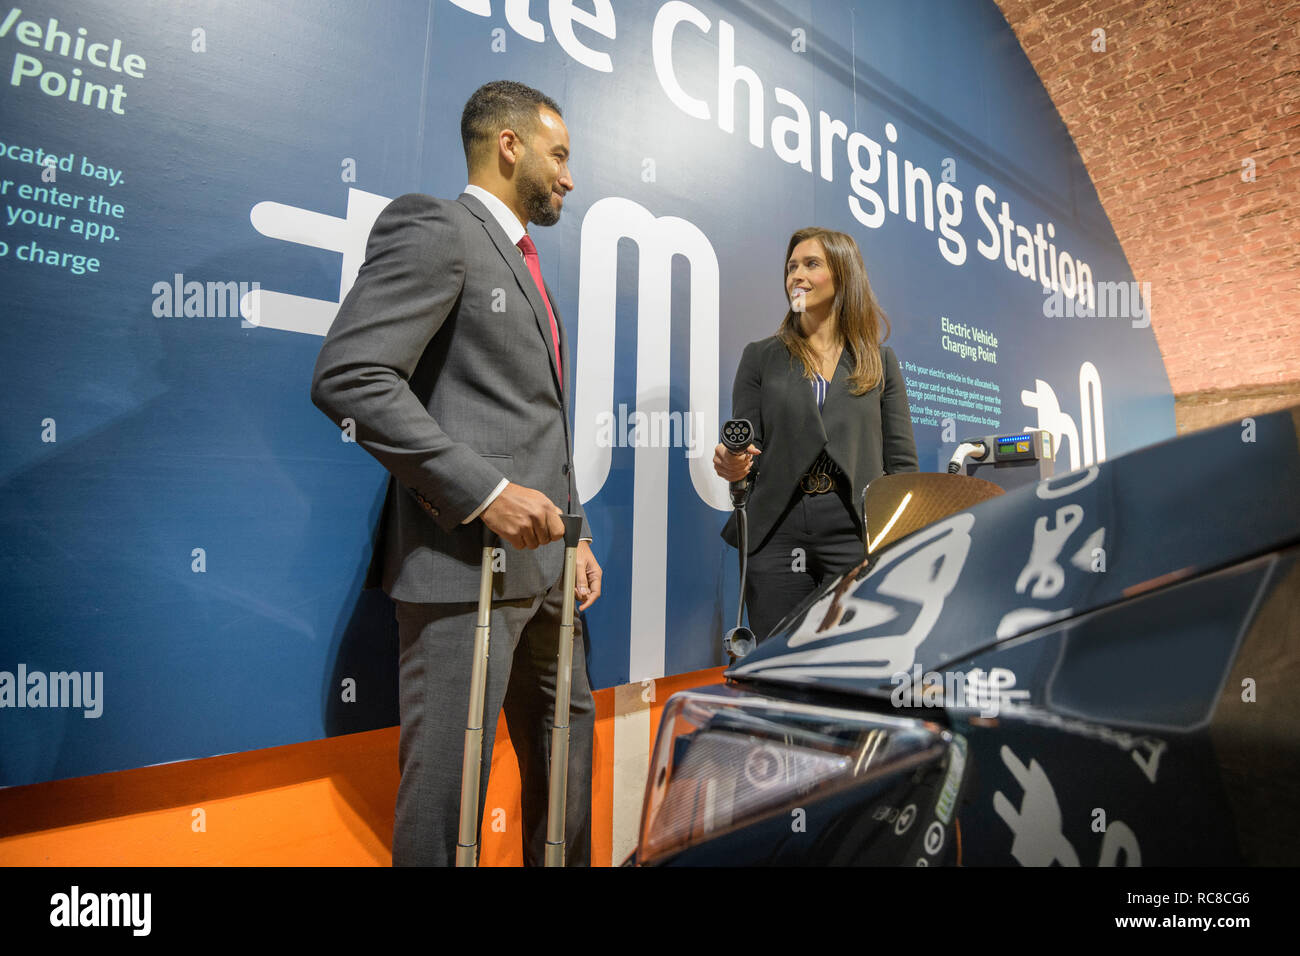 Businessman and businesswoman at electric vehicle charging station, Manchester, UK Stock Photo